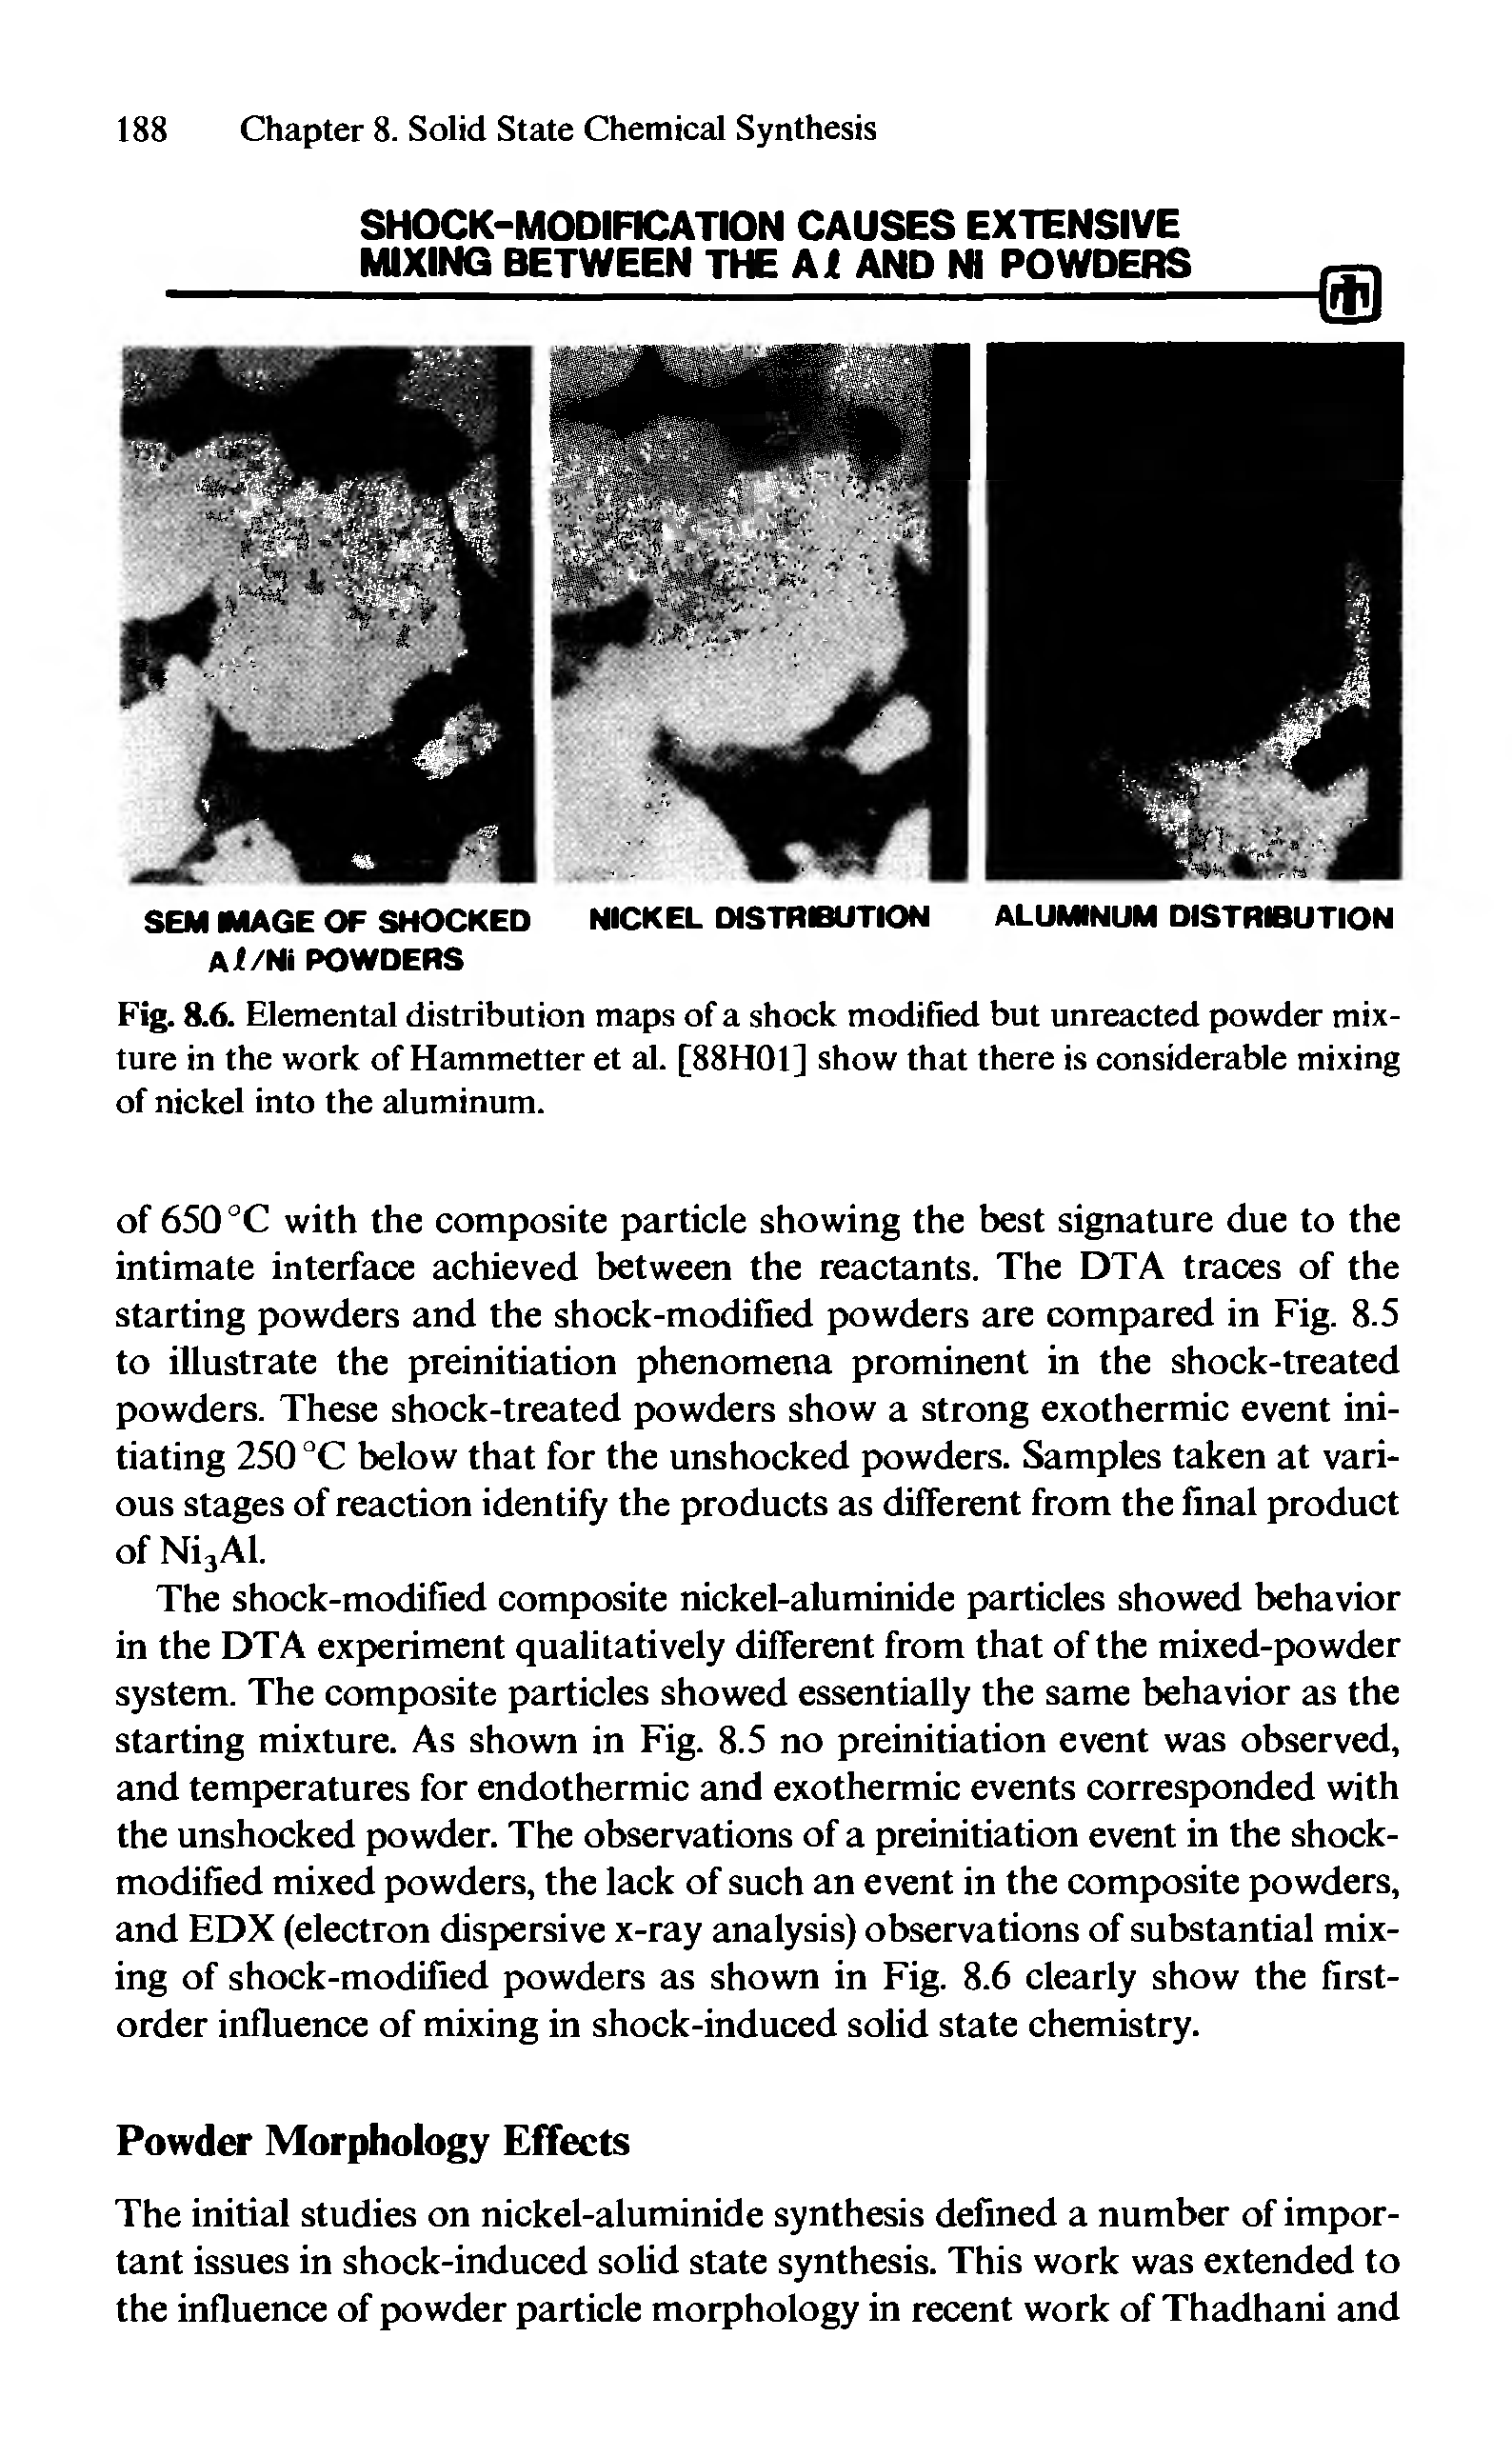 Fig. 8.6. Elemental distribution maps of a shoek modified but unreaeted powder mixture in the work of Hammetter et al. [88H01] show that there is eonsiderable mixing of niekel into the aluminum.